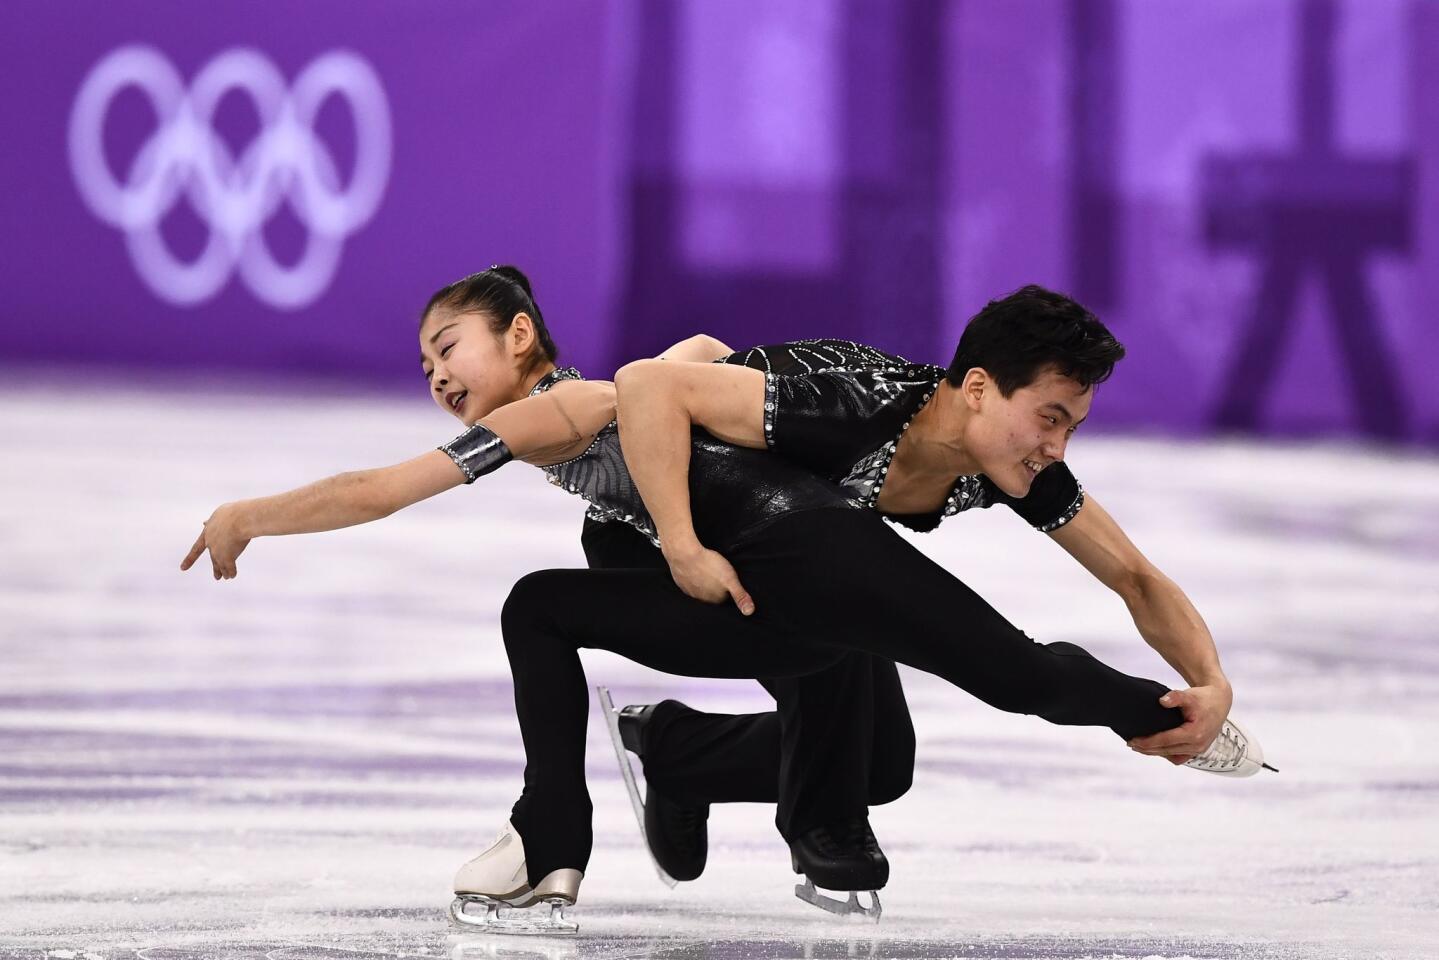 North Korea's Ryom Tae Ok (front) and North Korea's Kim Ju Sik hug after competing in the pair skating short program of the figure skating event during the Pyeongchang 2018 Winter Olympic Games at the Gangneung Ice Arena in Gangneung on February 14, 2018. / AFP PHOTO / Roberto SCHMIDTROBERTO SCHMIDT/AFP/Getty Images ** OUTS - ELSENT, FPG, CM - OUTS * NM, PH, VA if sourced by CT, LA or MoD **